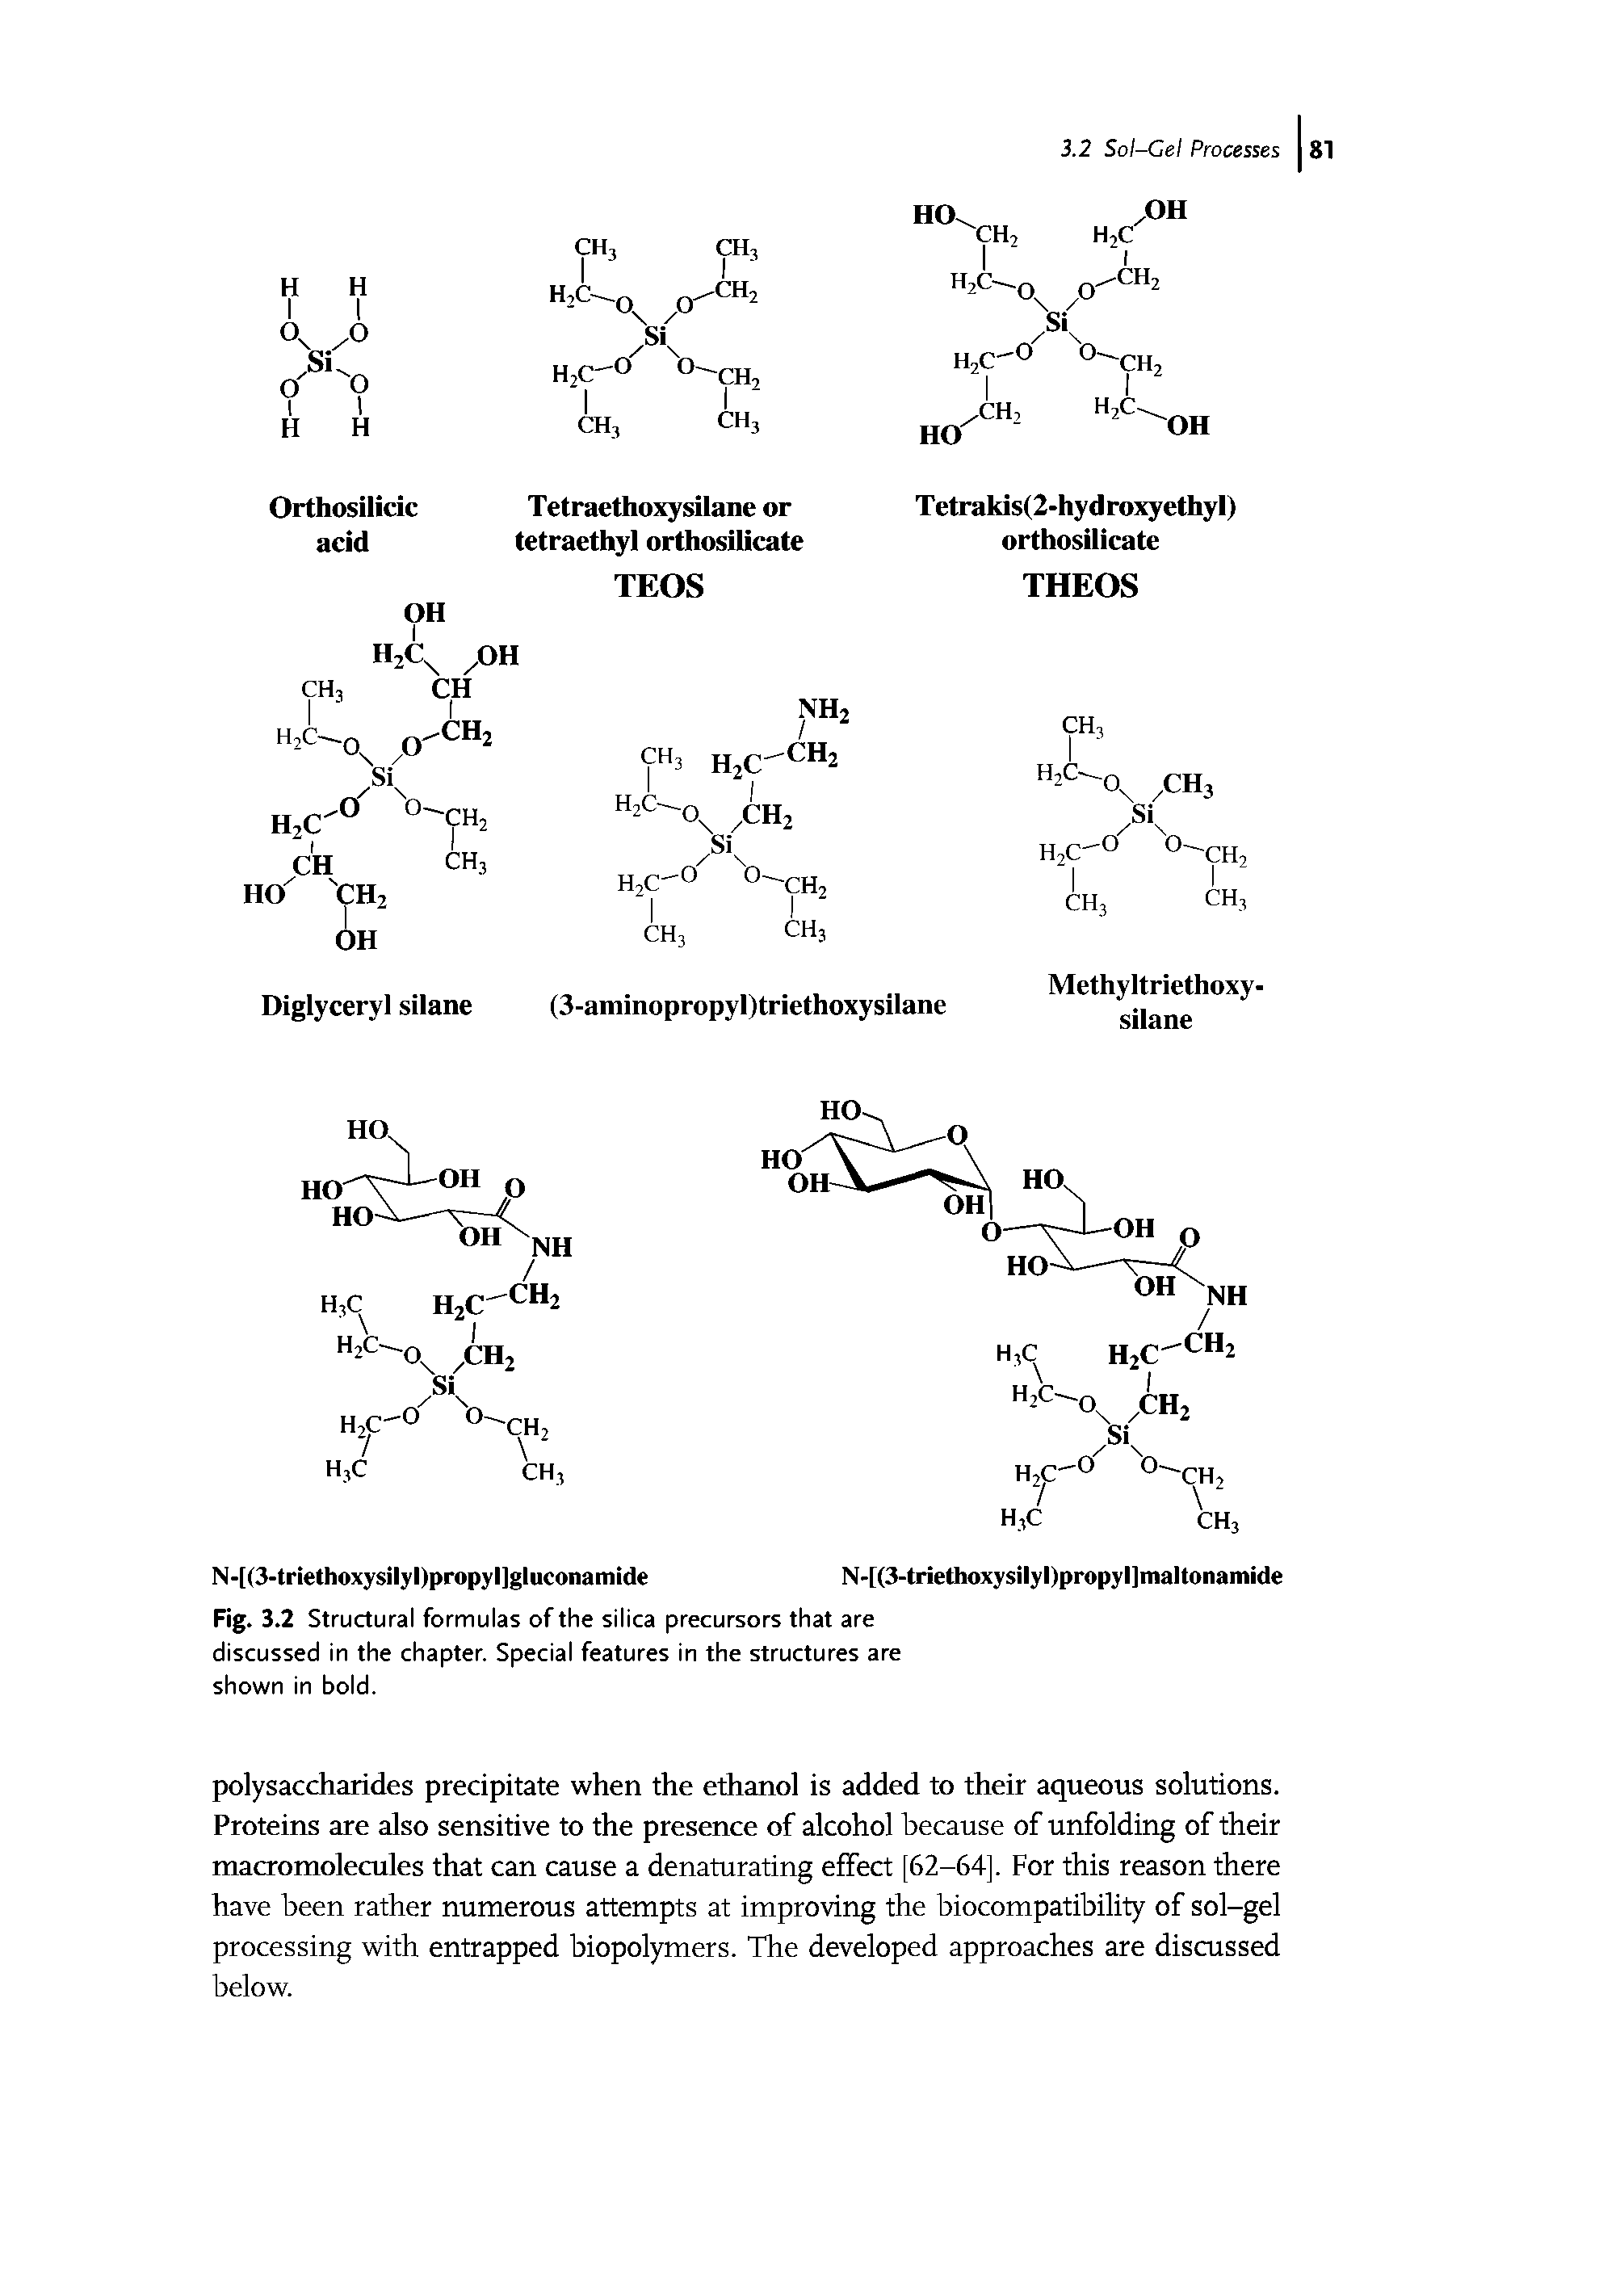 Fig. 3.2 Structural formulas of the silica precursors that are discussed in the chapter. Special features in the structures are shown in bold.